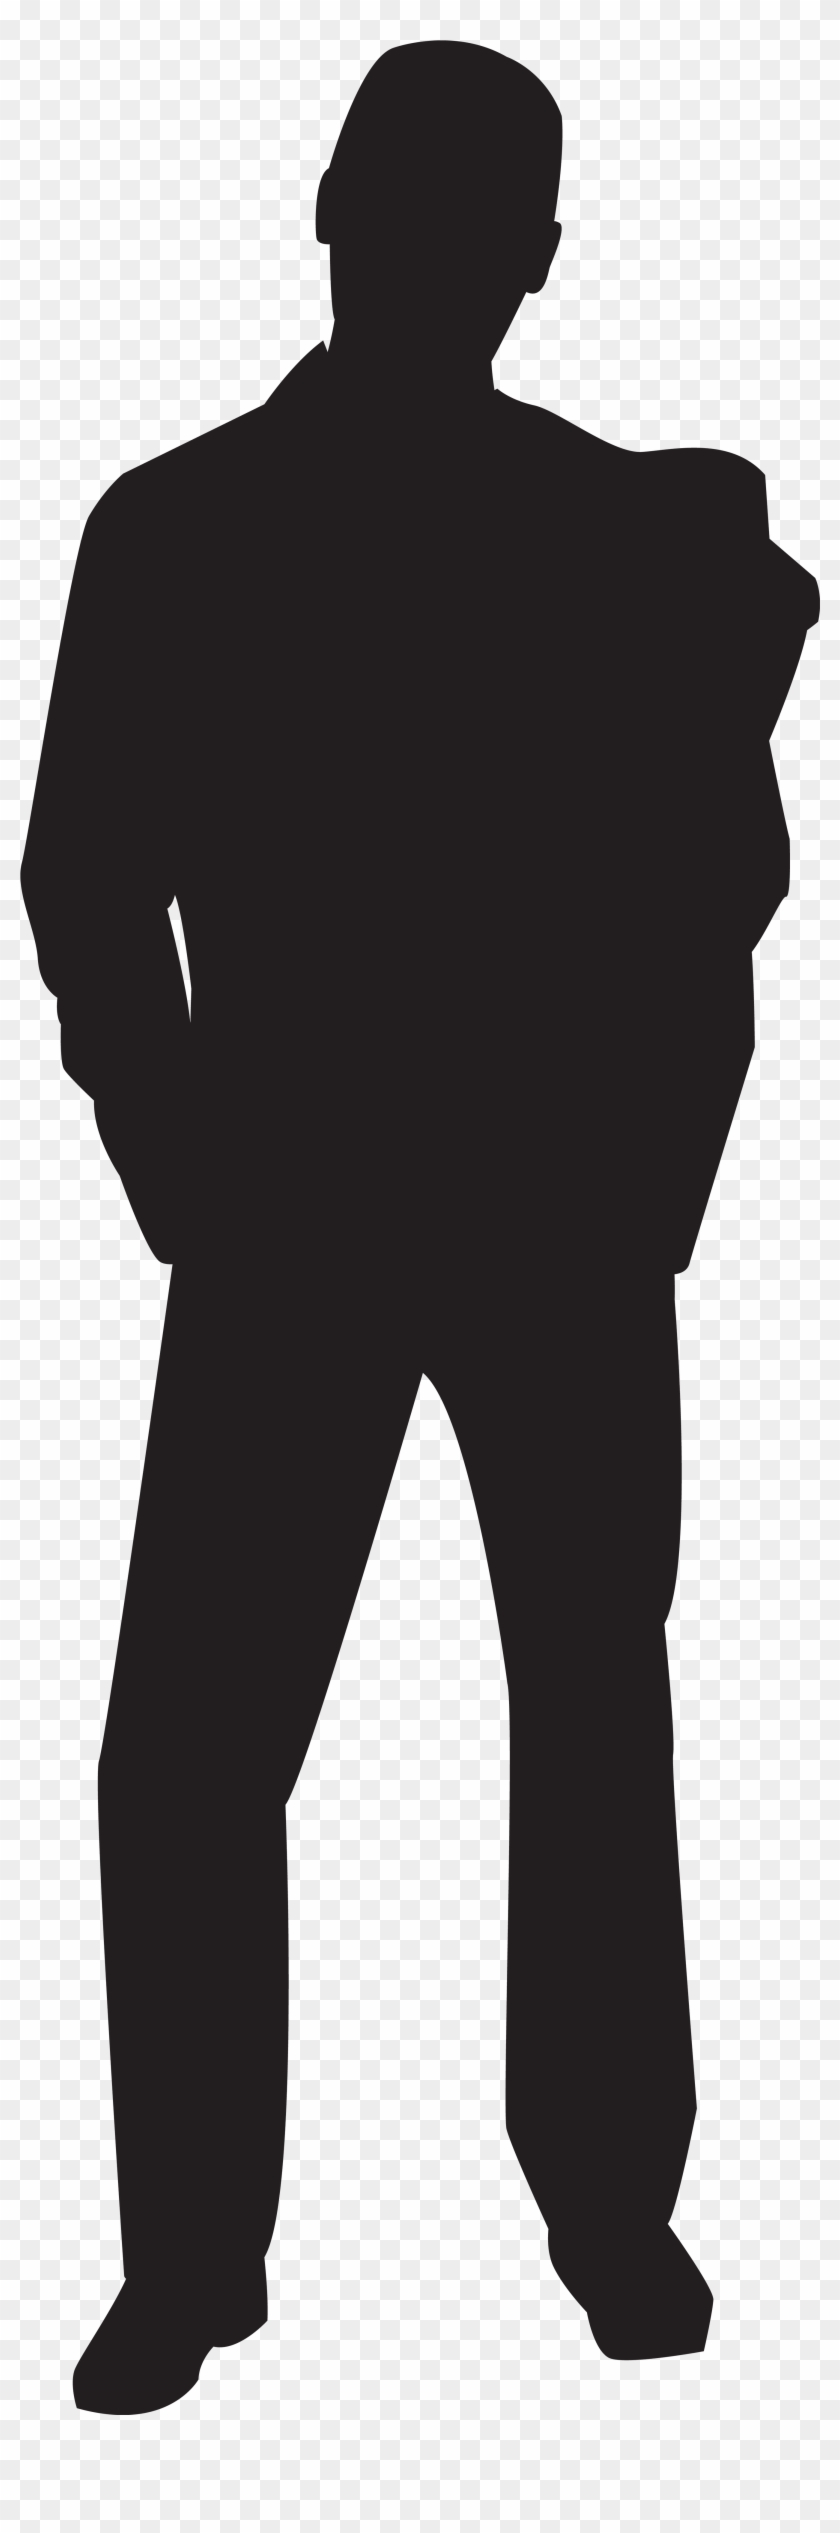 2767 X 8000 3 - Man Silhouette Clip Art - Png Download (#195490) - PikPng